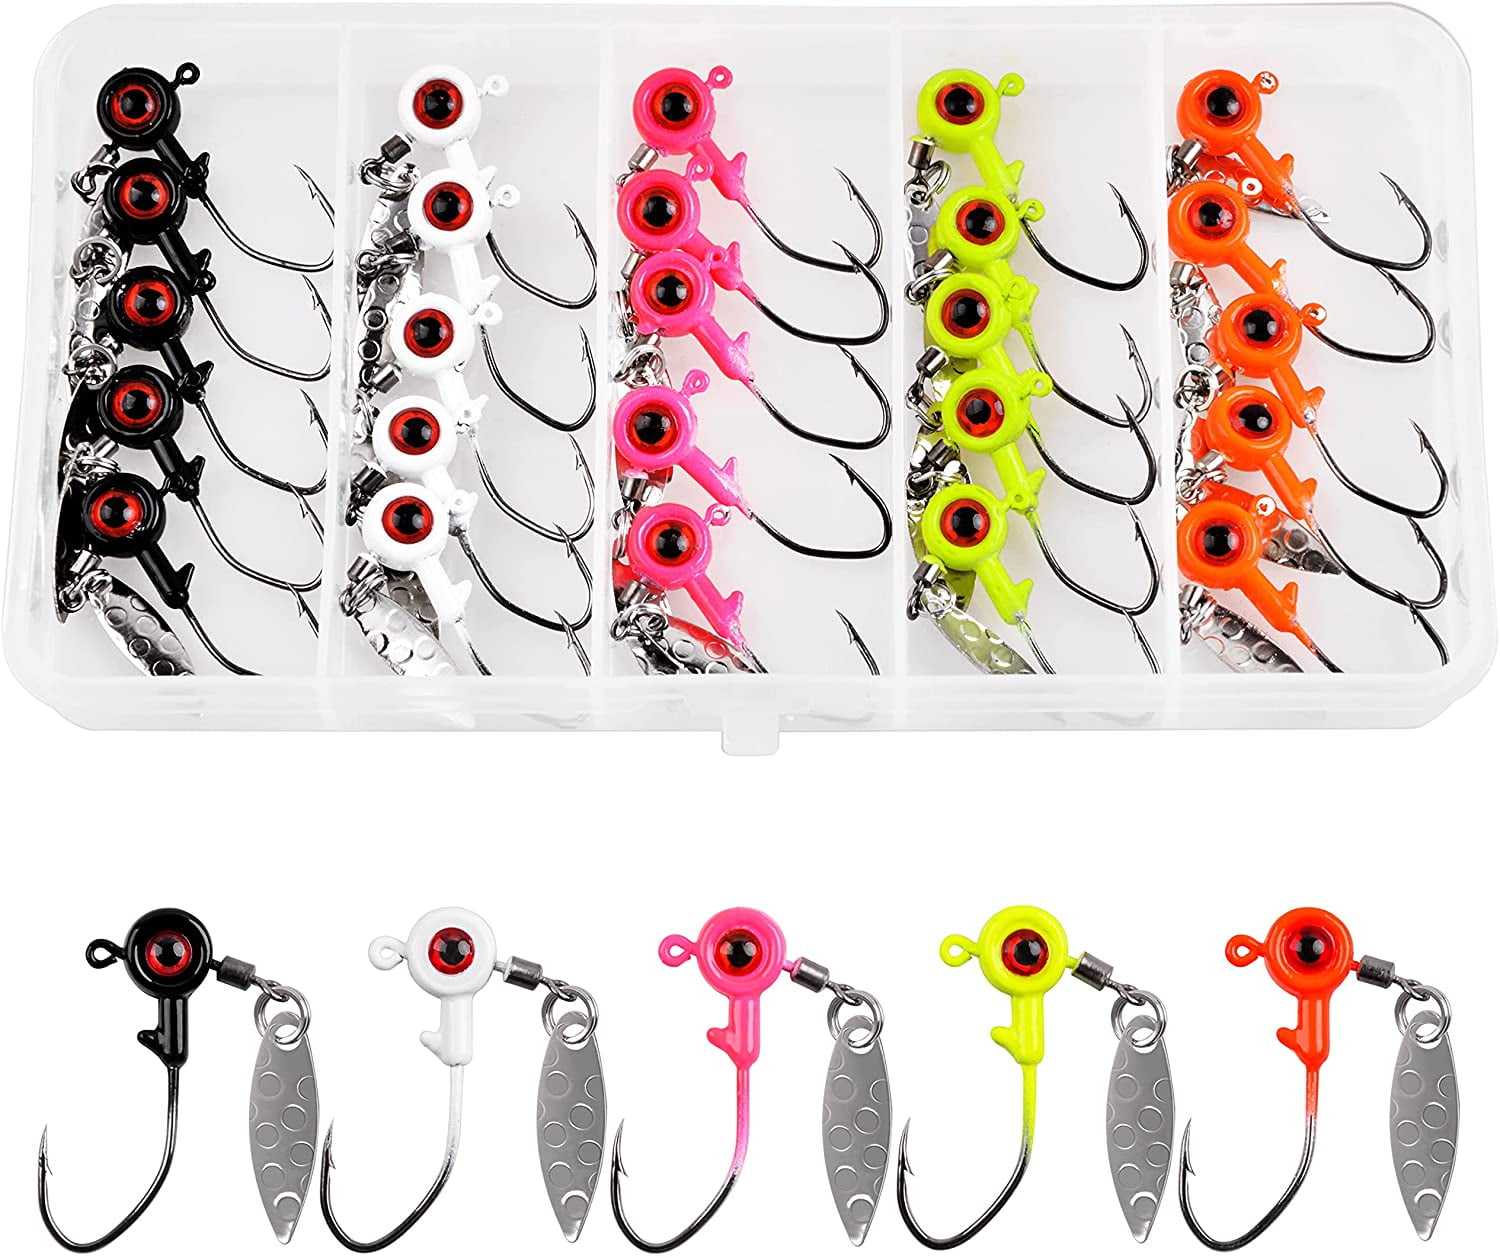 Ready2Fish Inline Spinner Lure - Firetiger, Spinnerbaits 